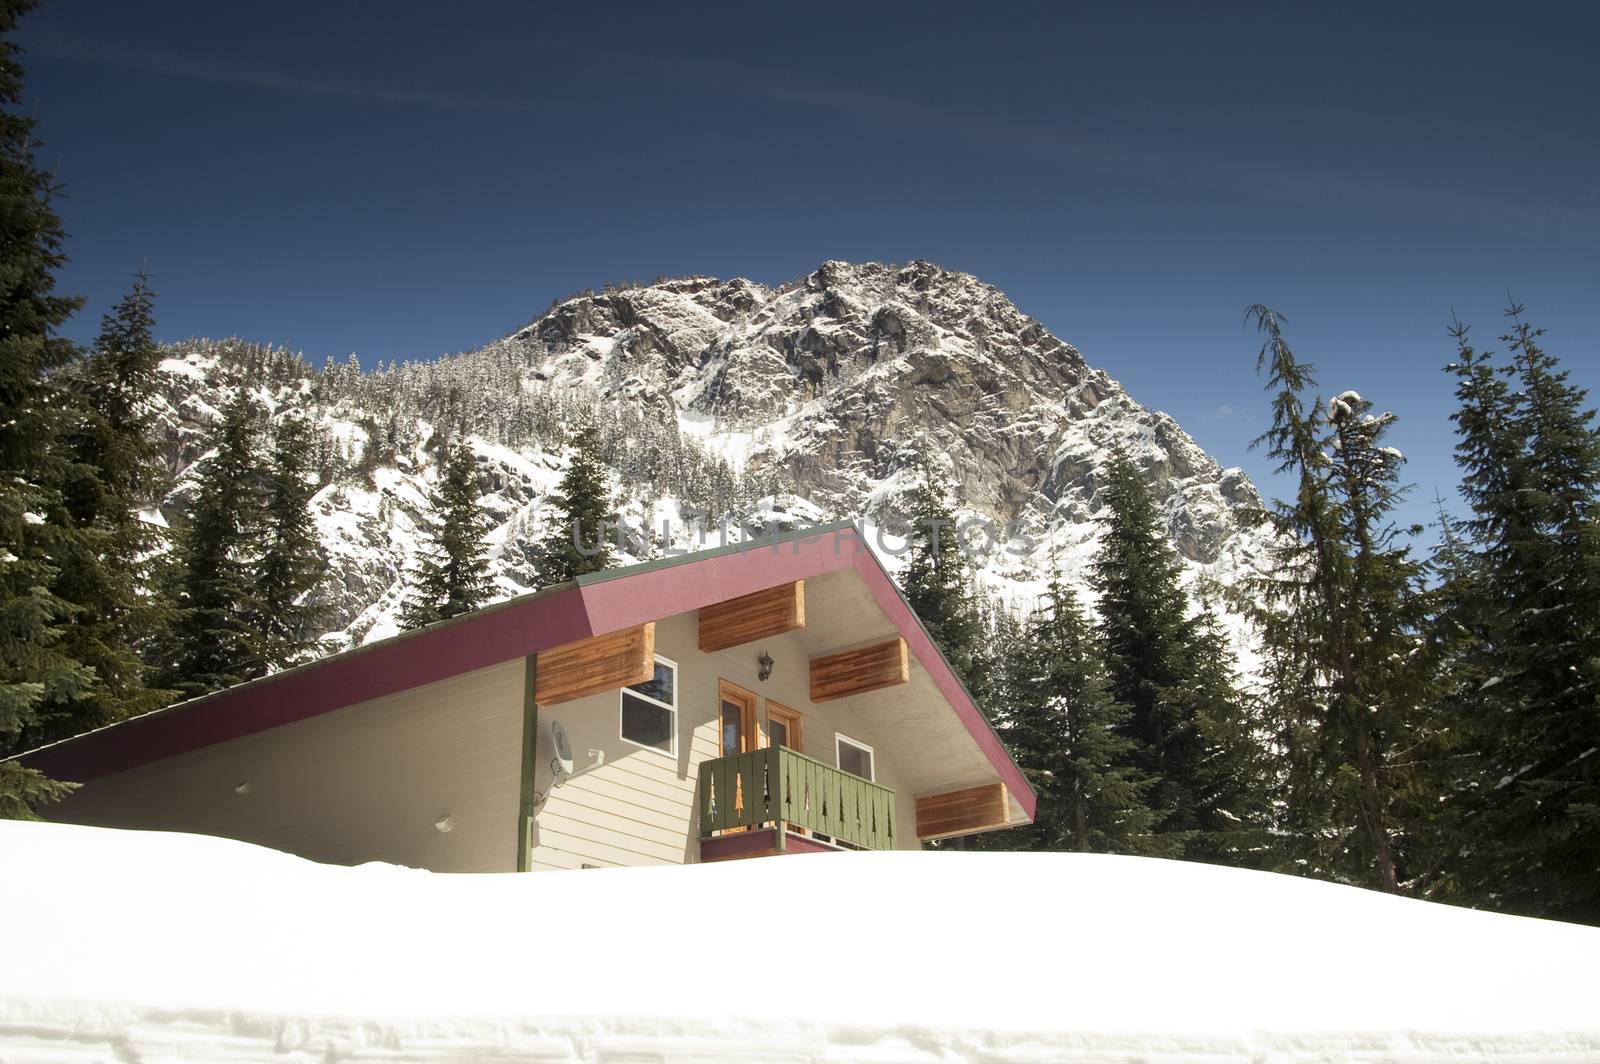 Private Lodging Ski Chalet Lodge Heavy Snow North Cascades by ChrisBoswell